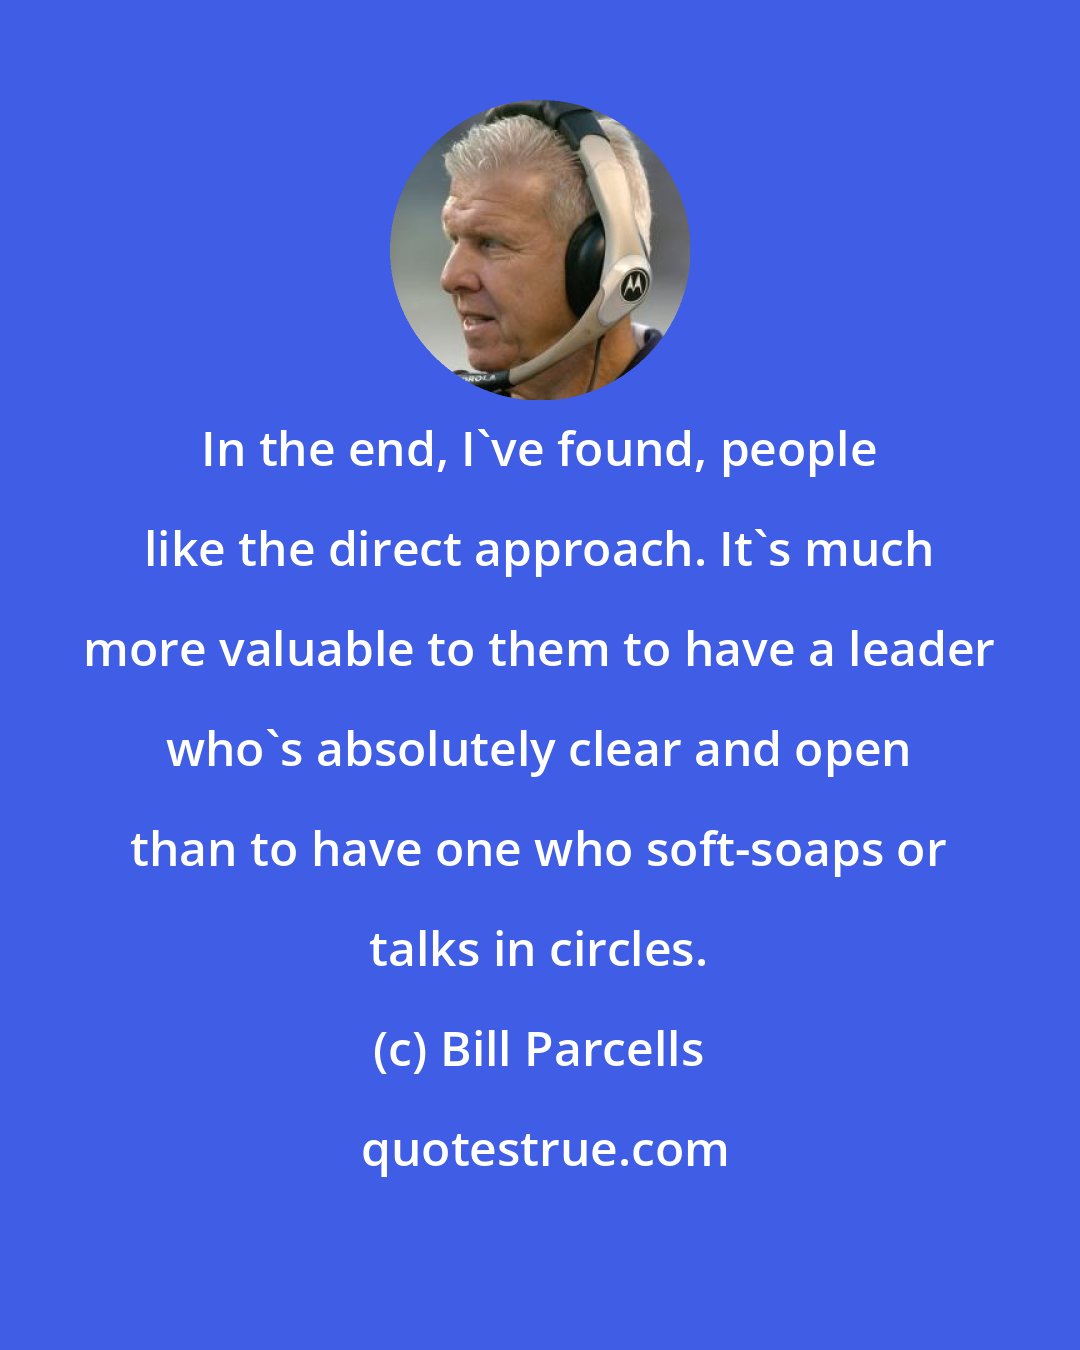 Bill Parcells: In the end, I've found, people like the direct approach. It's much more valuable to them to have a leader who's absolutely clear and open than to have one who soft-soaps or talks in circles.